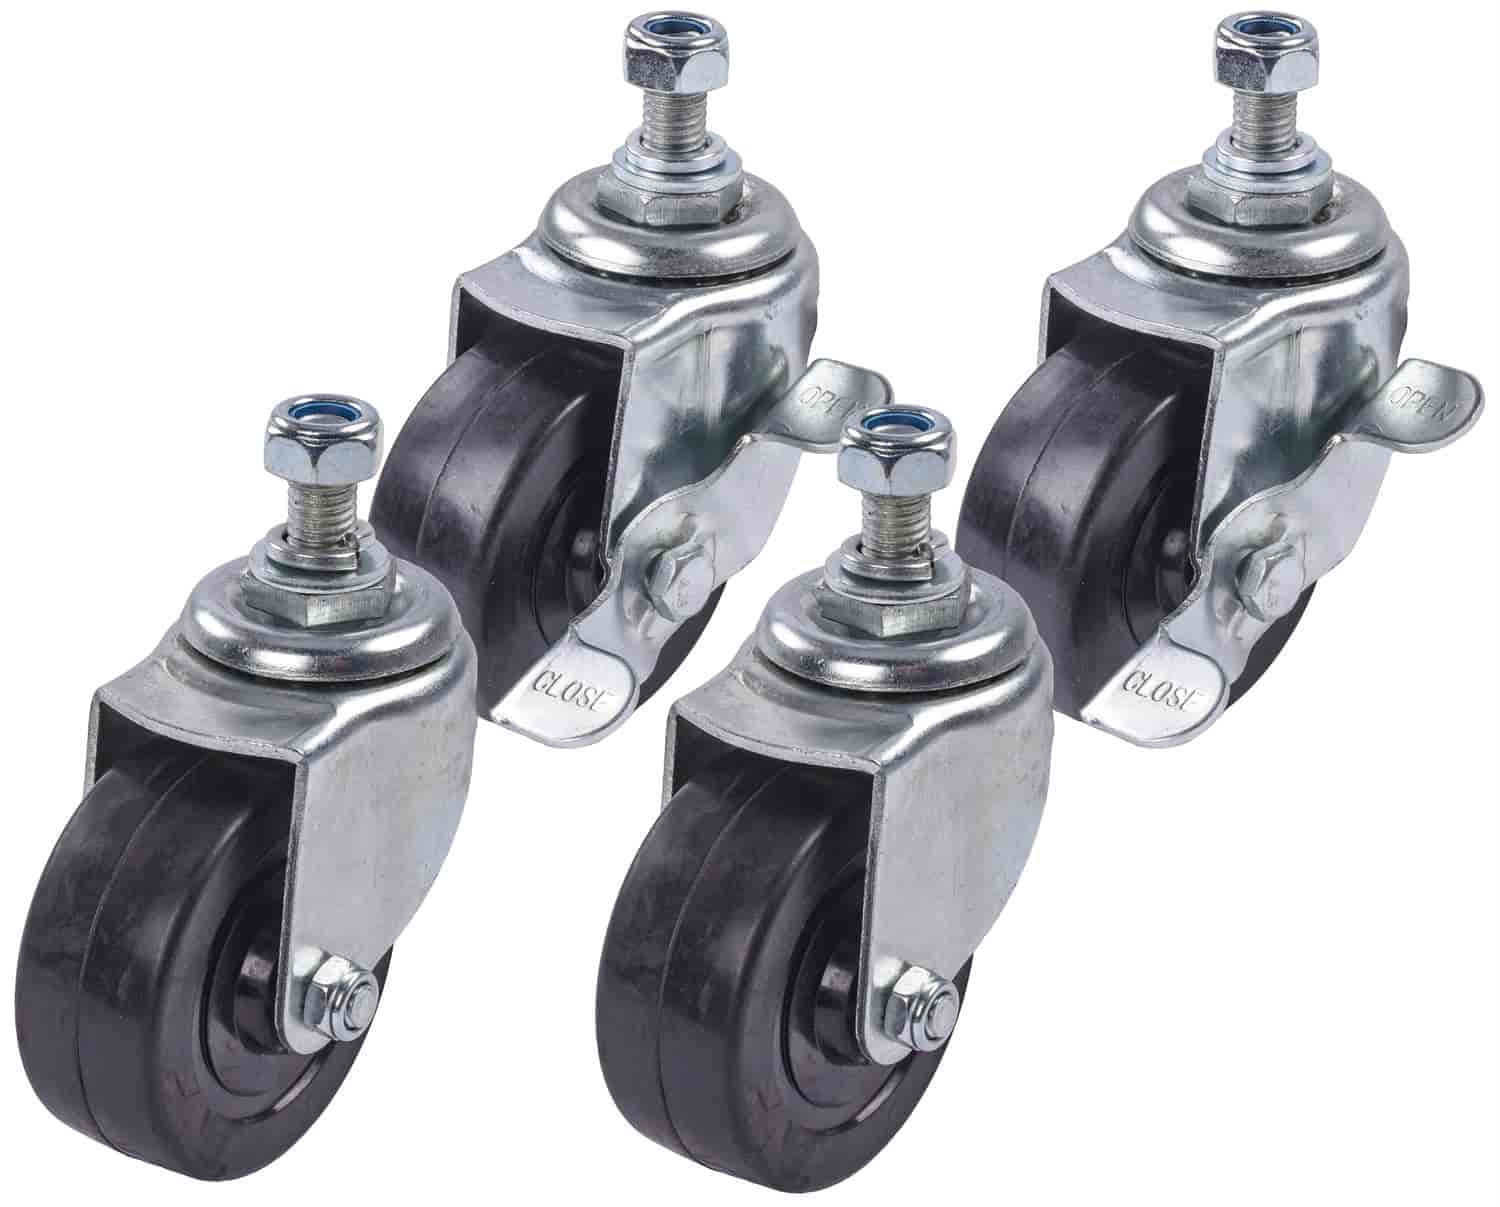 Replacement Casters for JEGS 3-Shelf Shop Cart 555-81424 [Set of 4]